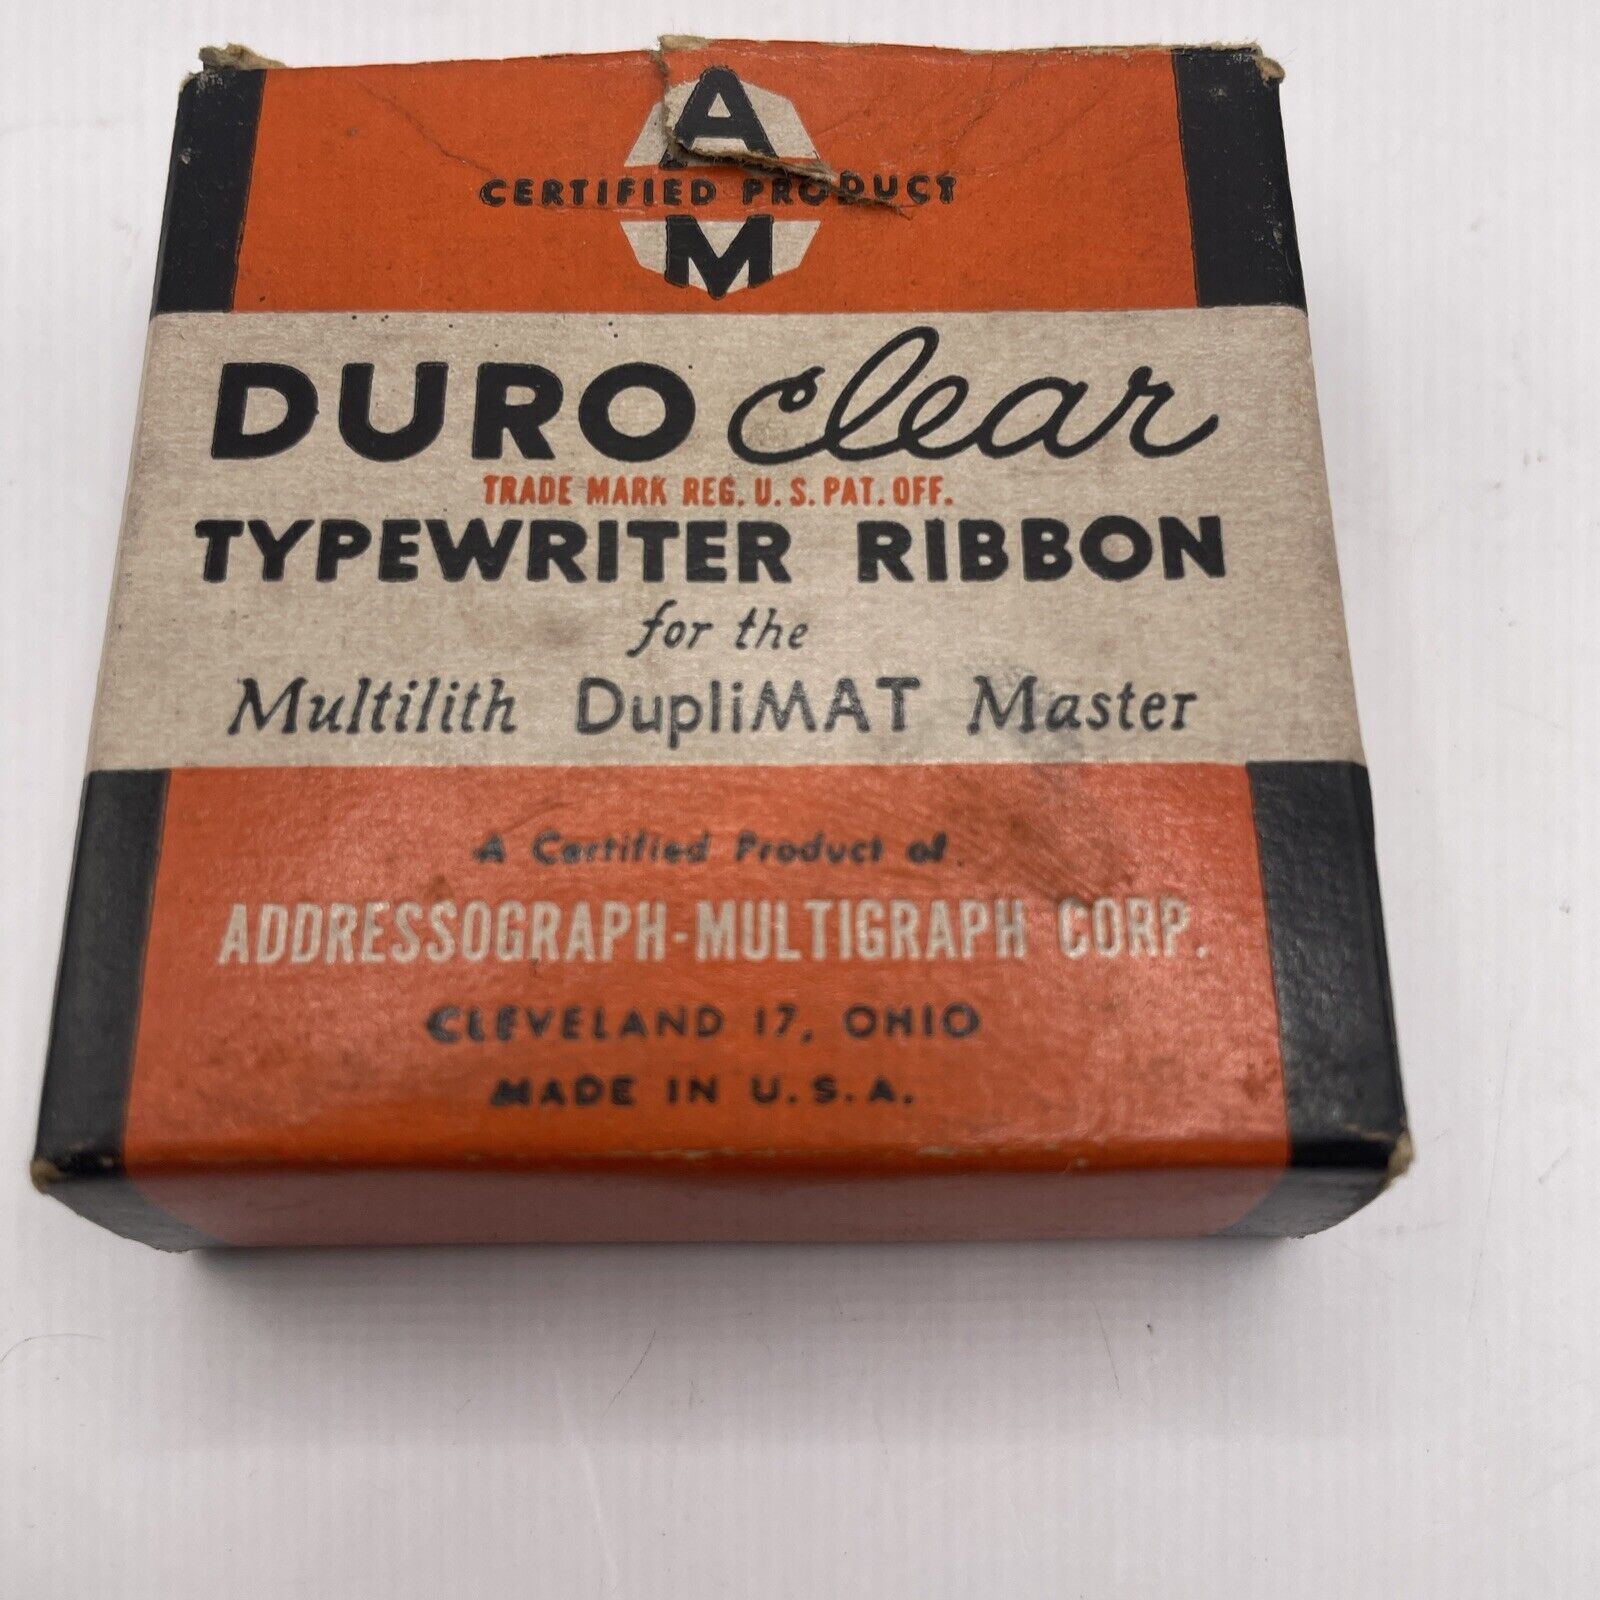 DURO CLEAR TYPEWRITER RIBBON for Multilith Duplimat Master With Original Box VTG